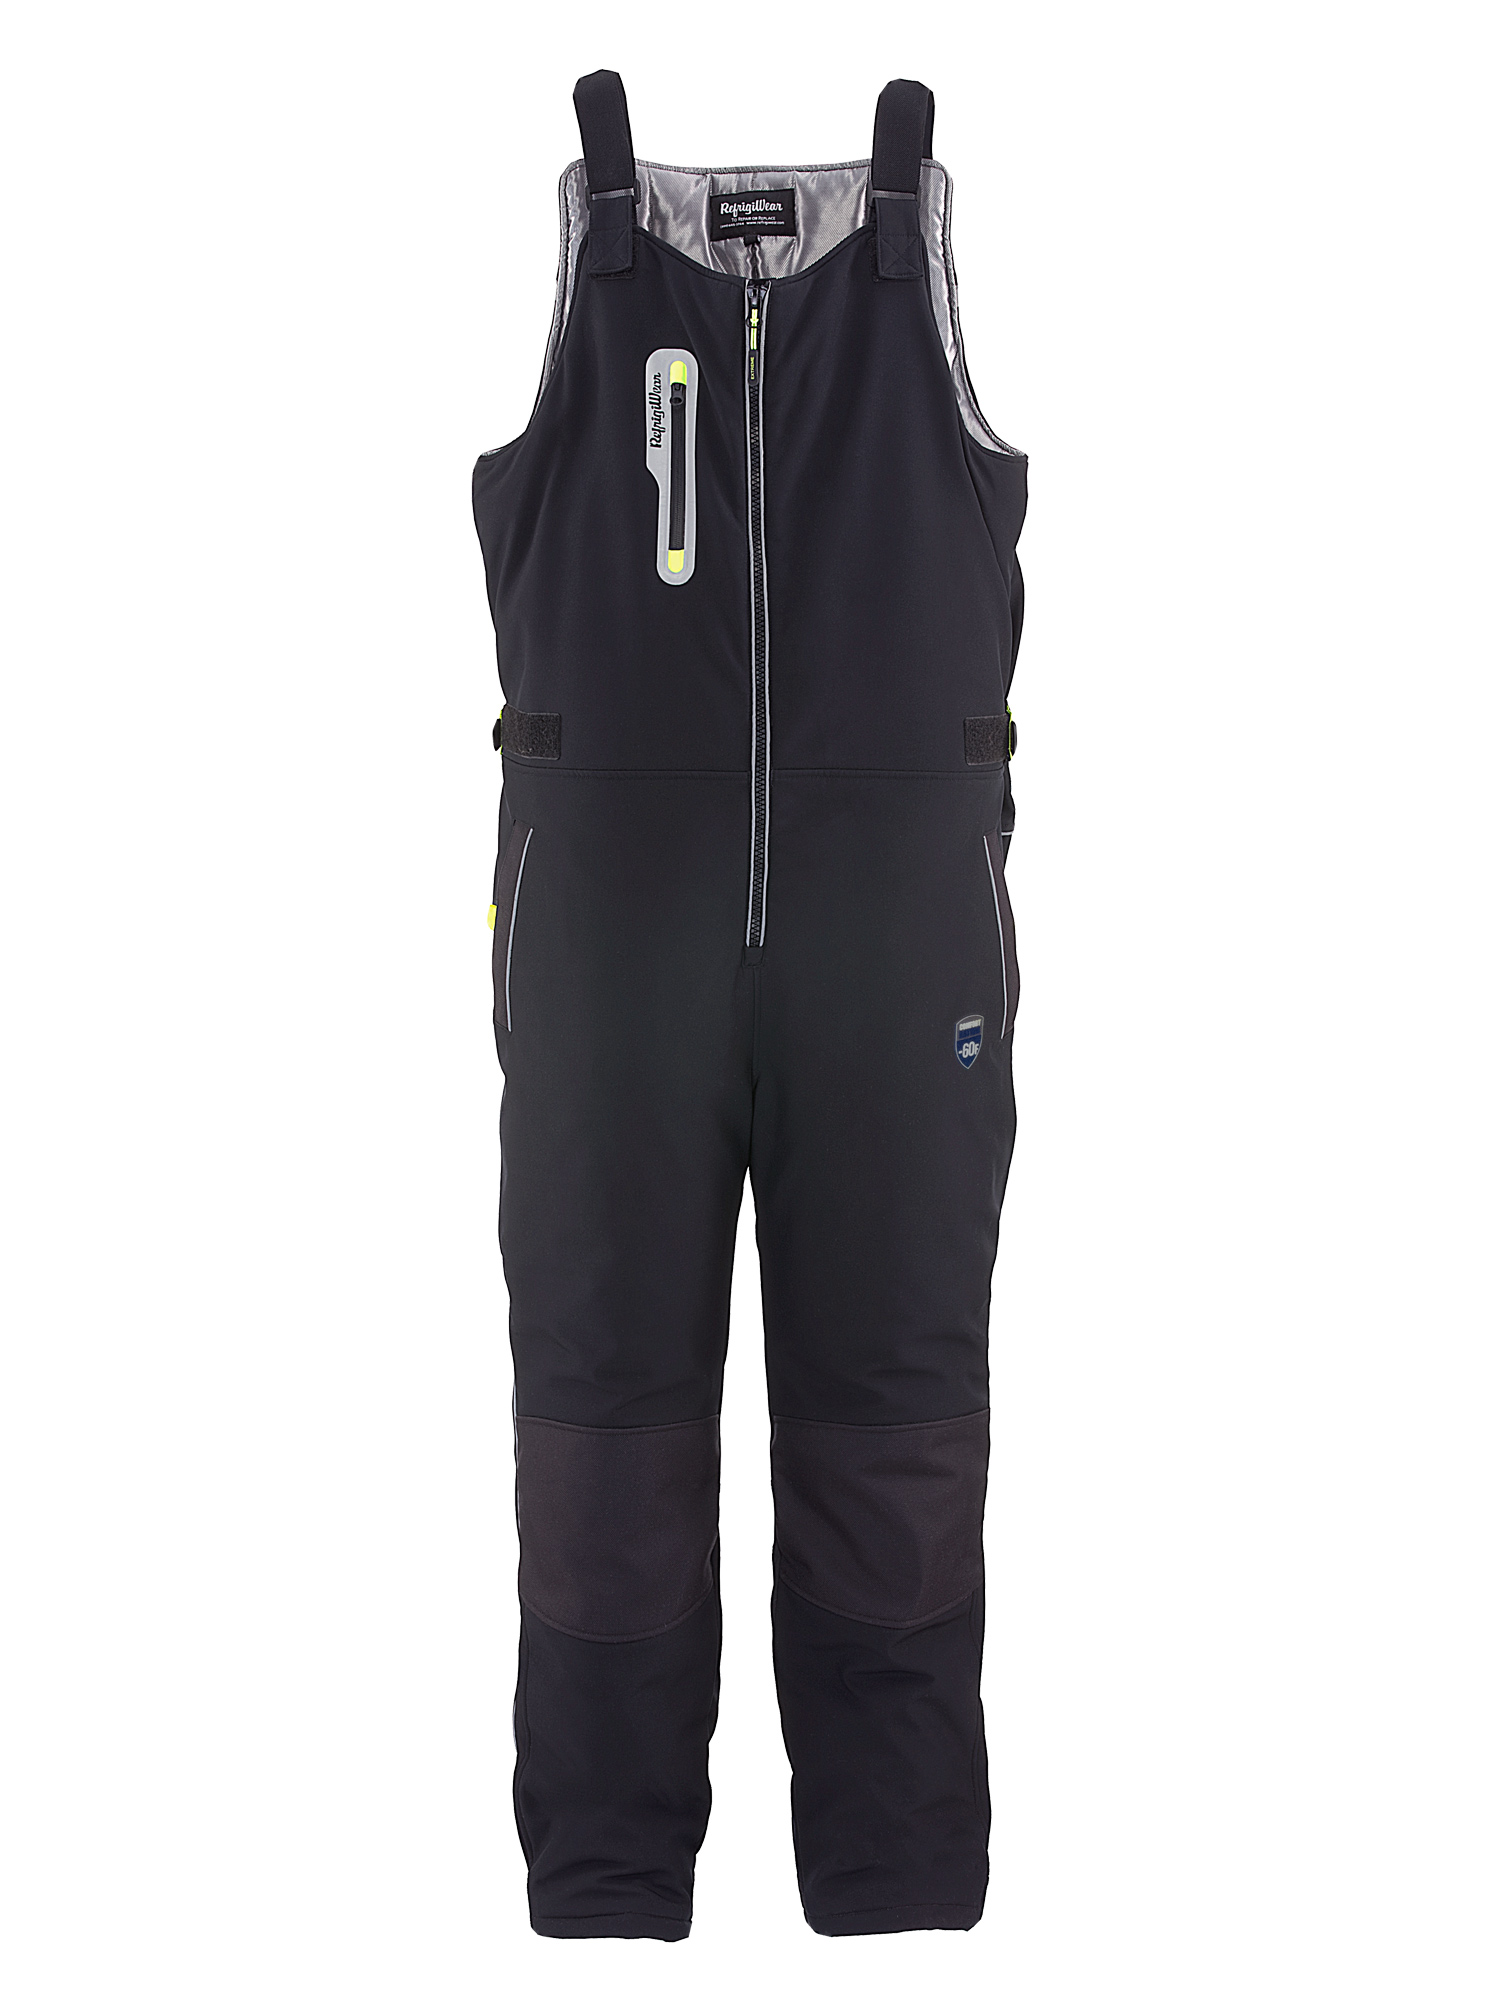 Extreme Softshell Bib Overalls (795), Rated for -60°F